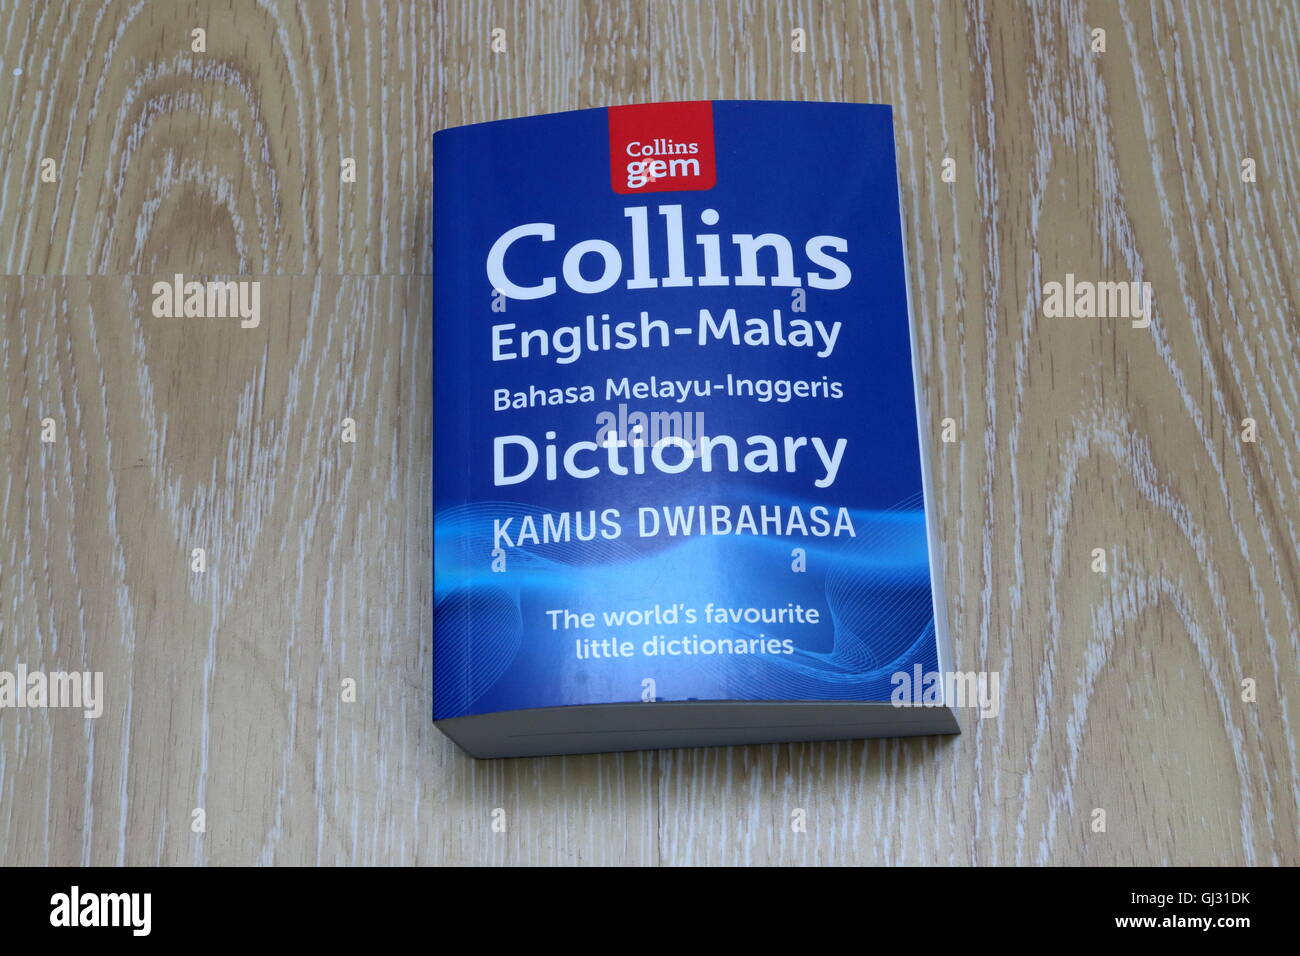 Collins English Malay Dictionary On Wooden Background Stock Photo Alamy